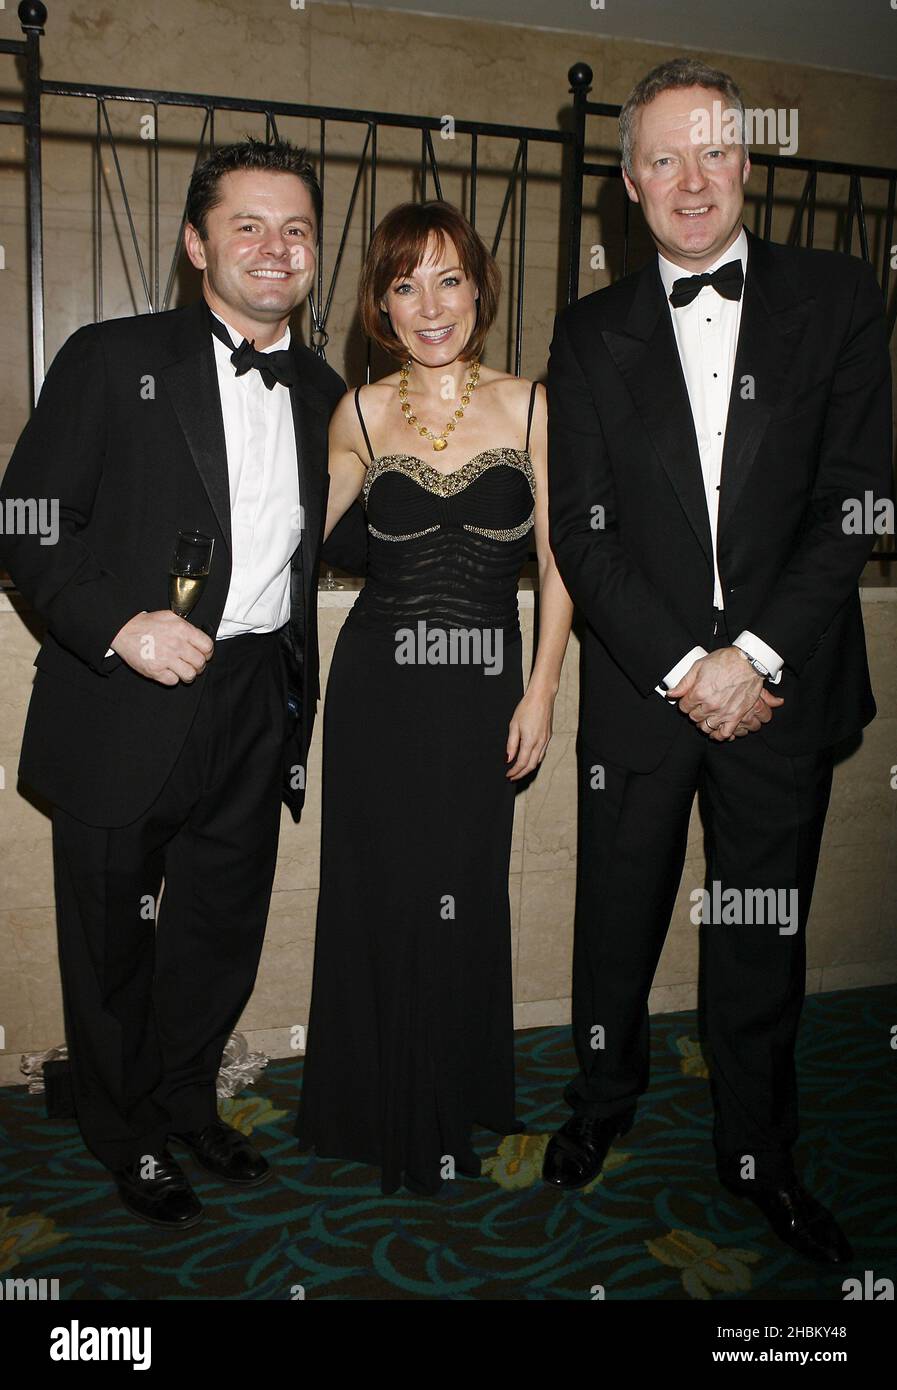 Chris Hollins, Sian Williams, Rory Bremner at the Sparks Ball, The Hilton, London. Stock Photo